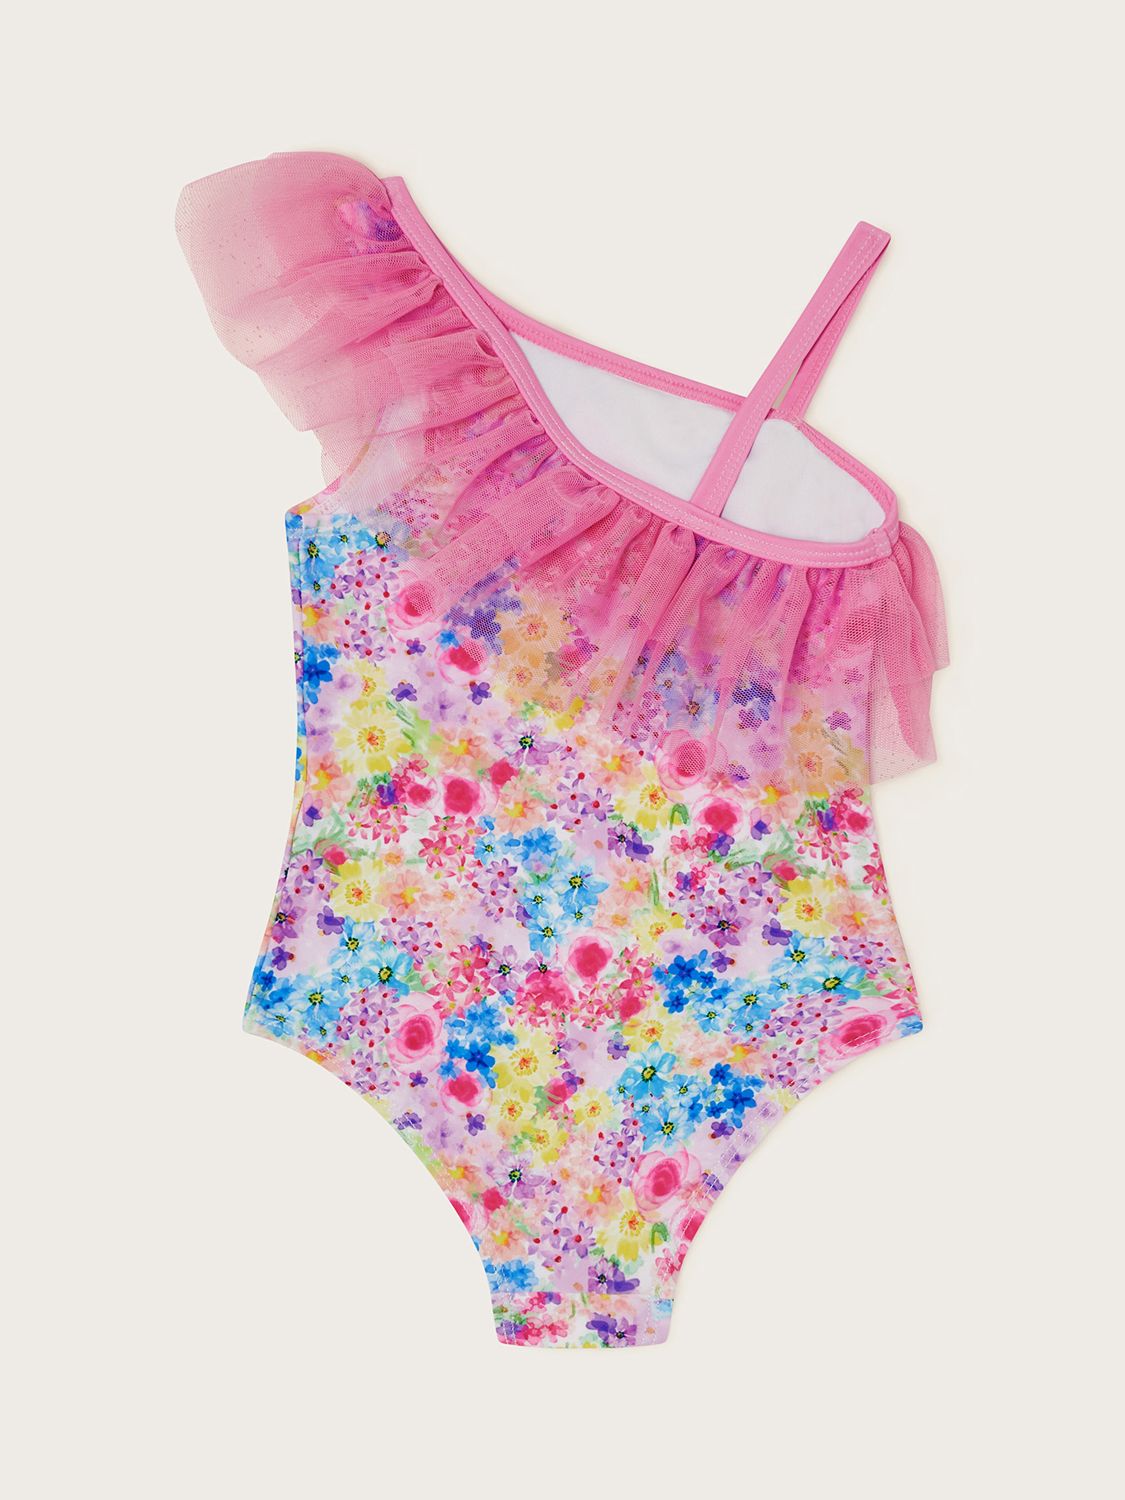 Monsoon Baby Ditsy Floral Print Mesh Ruffle Swimsuit, Pink/Multi, 0-3 months